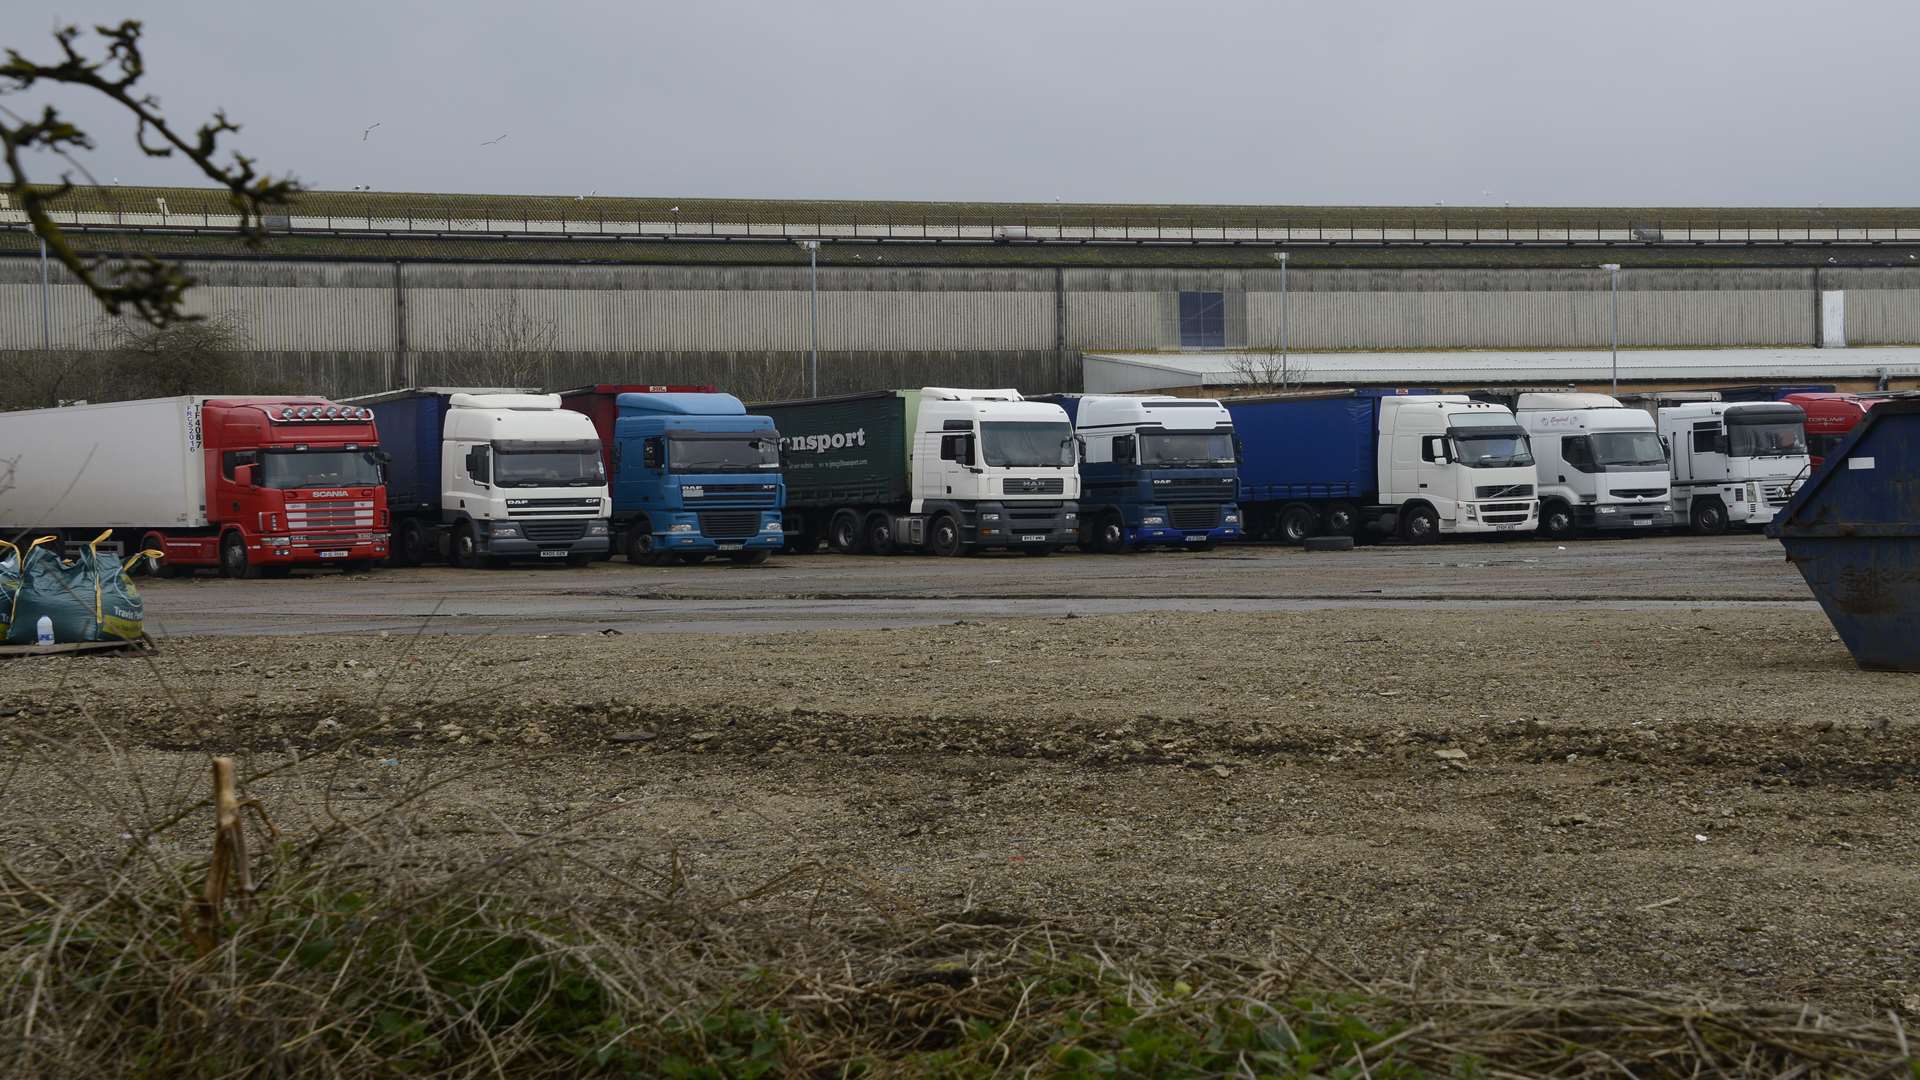 The new lorry park has opened up off Beaver Lane